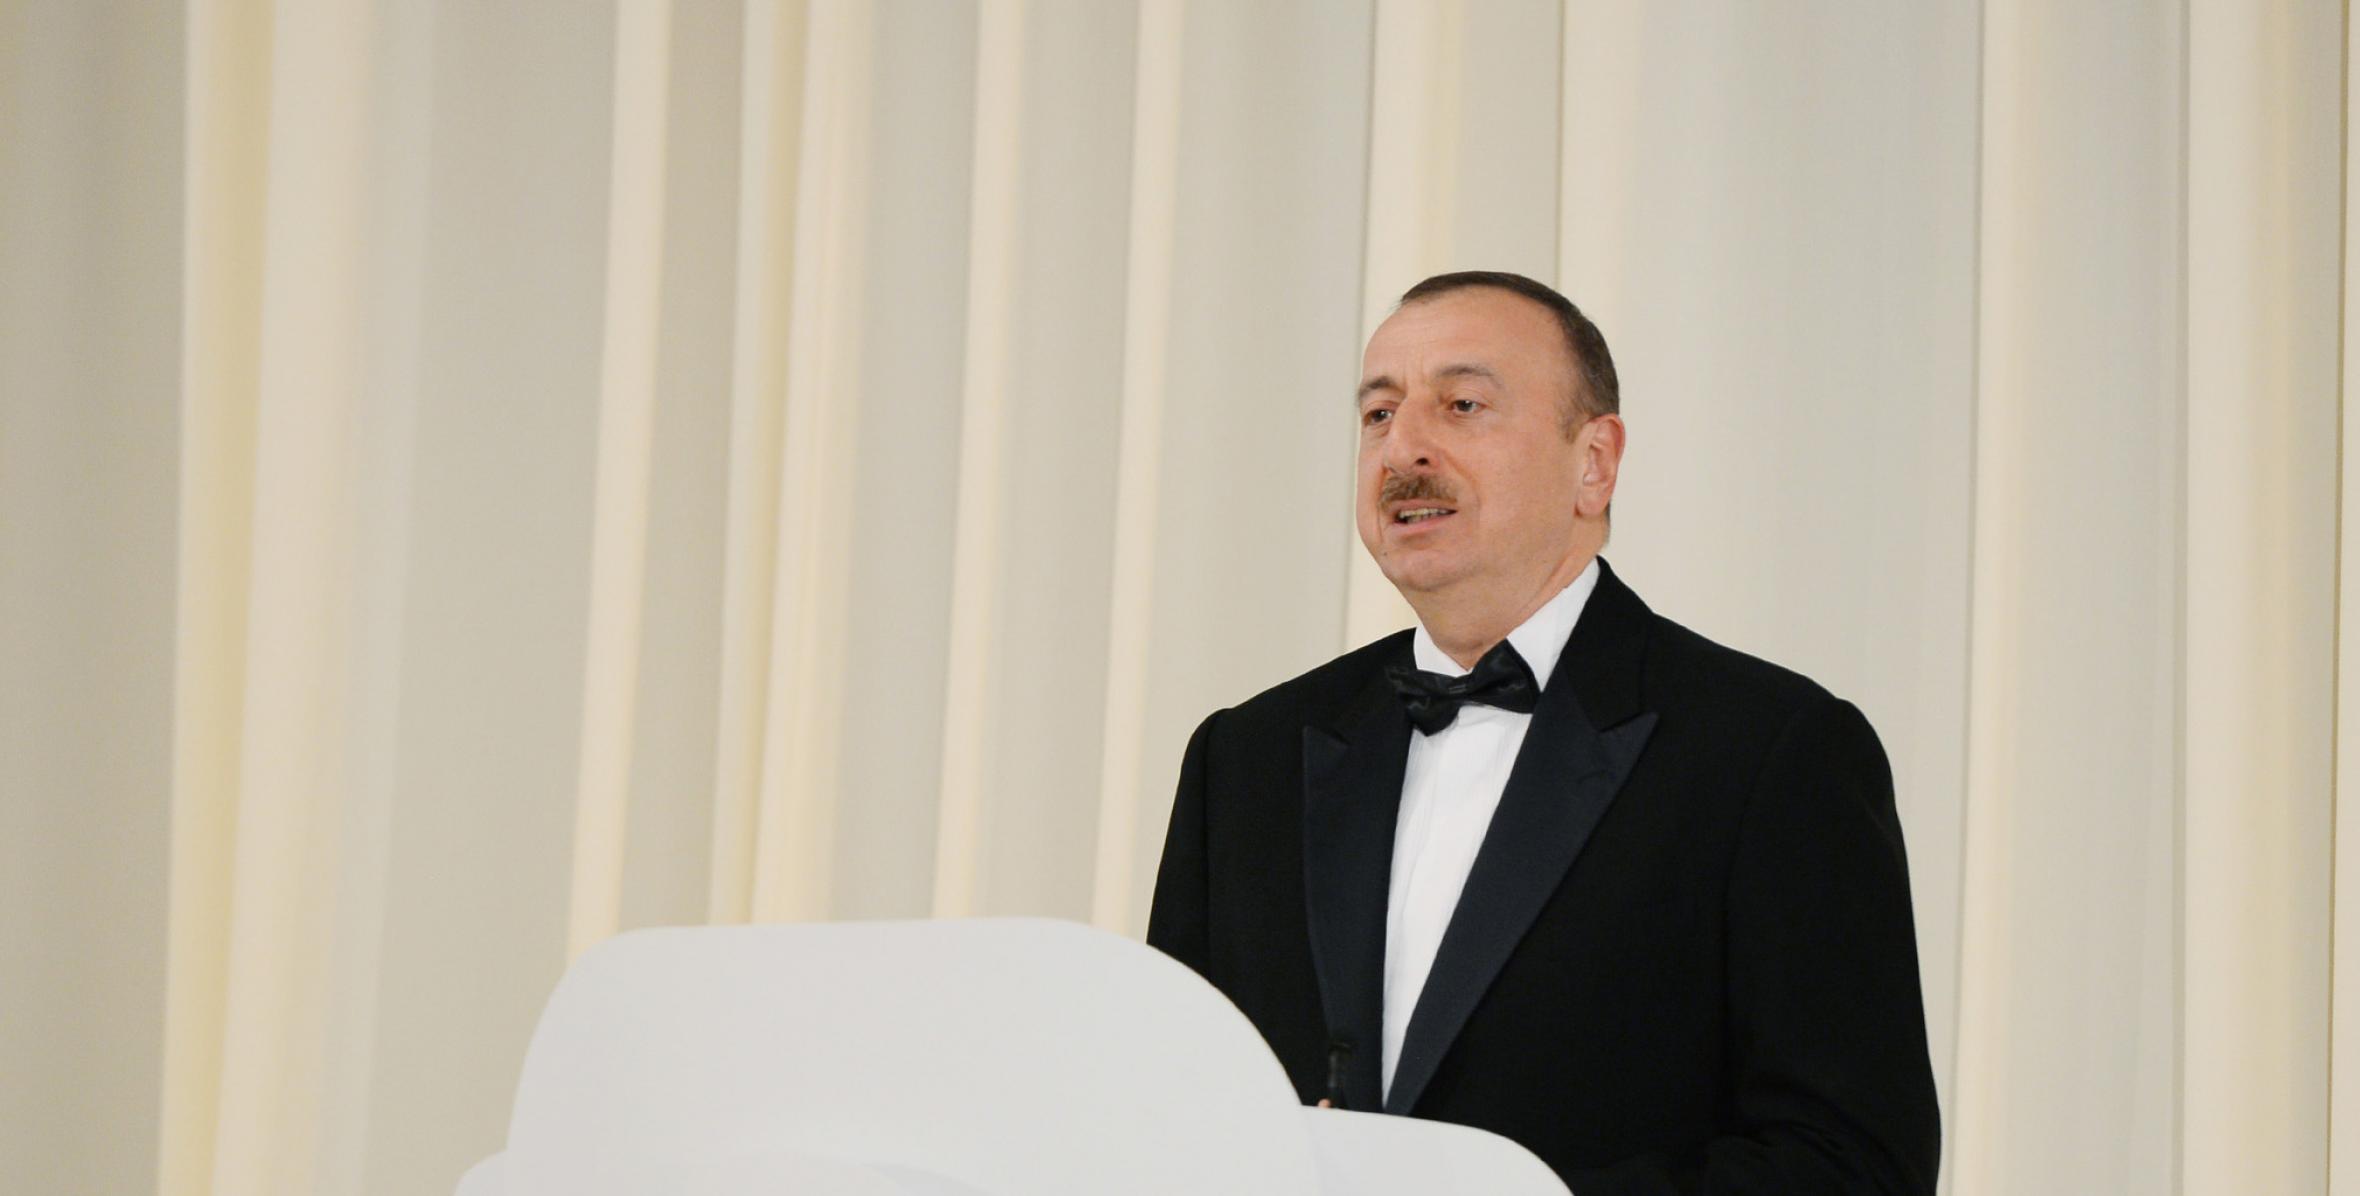 Speech by Ilham Aliyev at the ceremony marking the 92nd birthday anniversary of national leader Heydar Aliyev and 11th anniversary of the establishment of the Heydar Aliyev Foundation